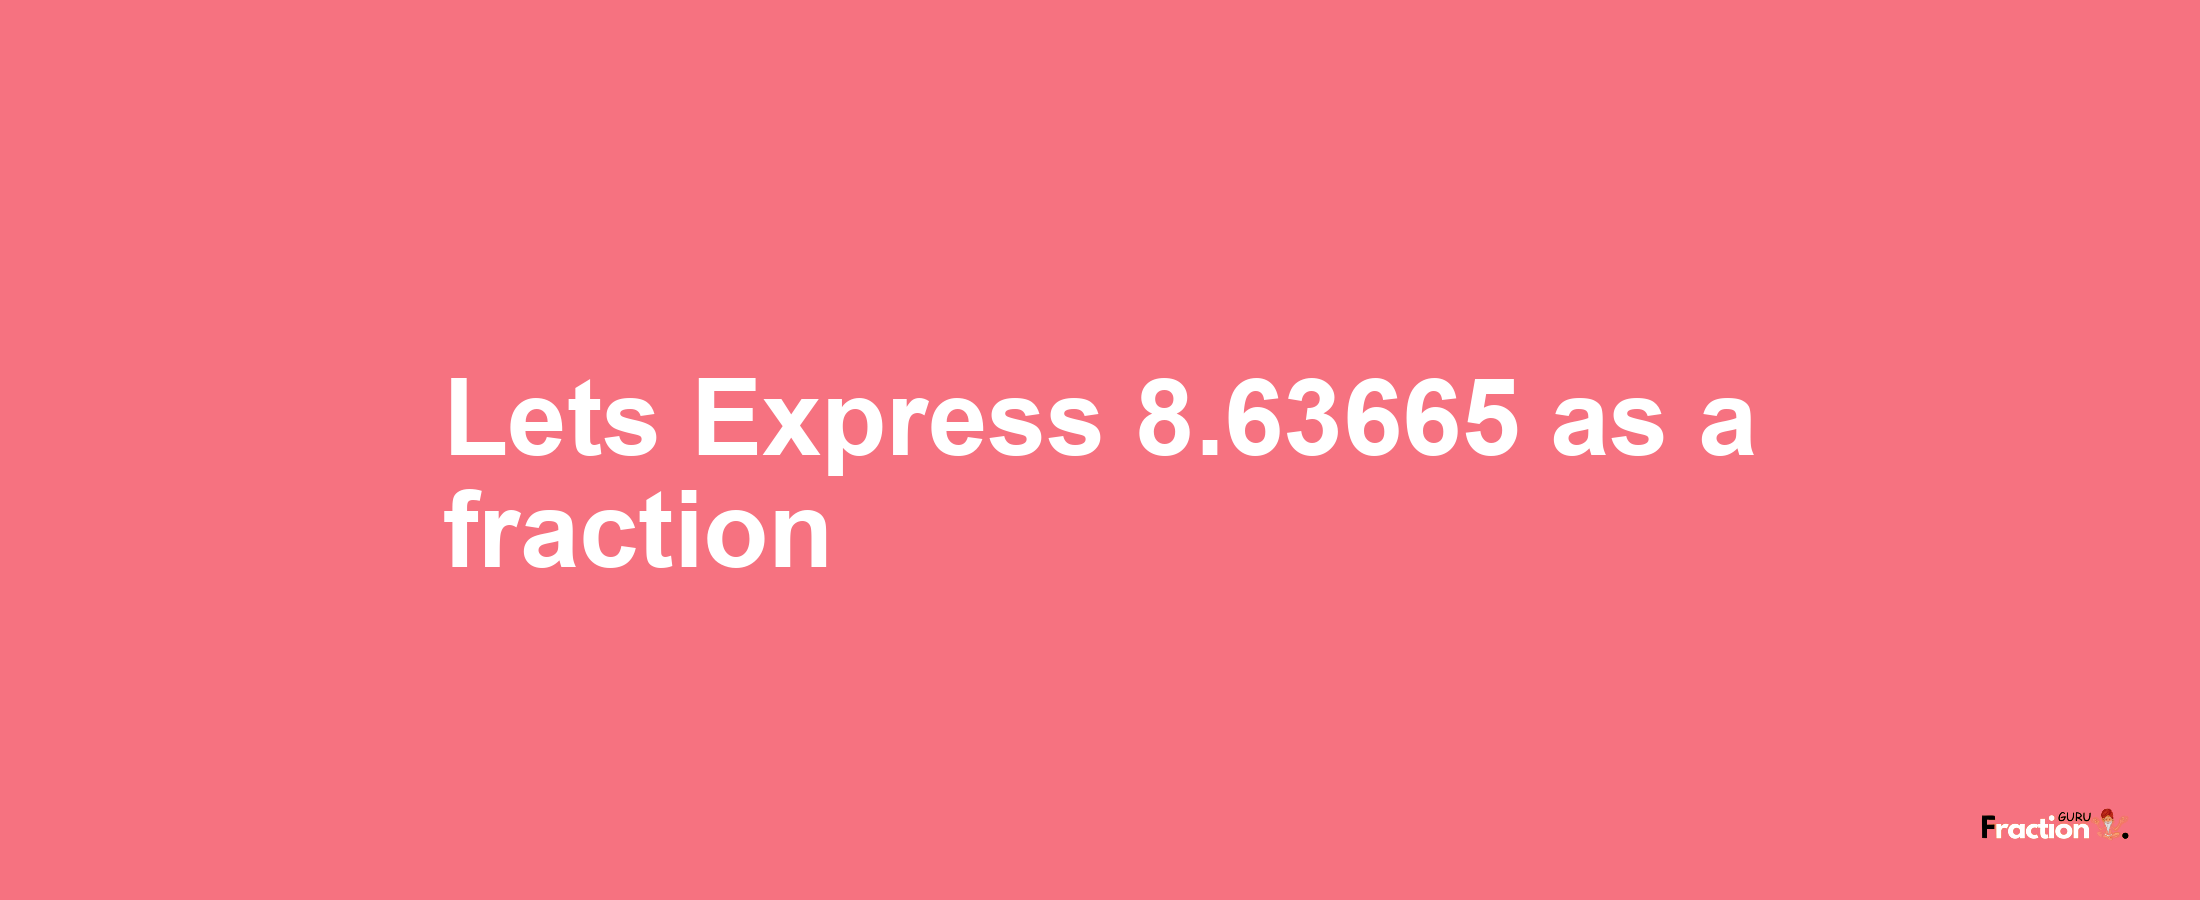 Lets Express 8.63665 as afraction